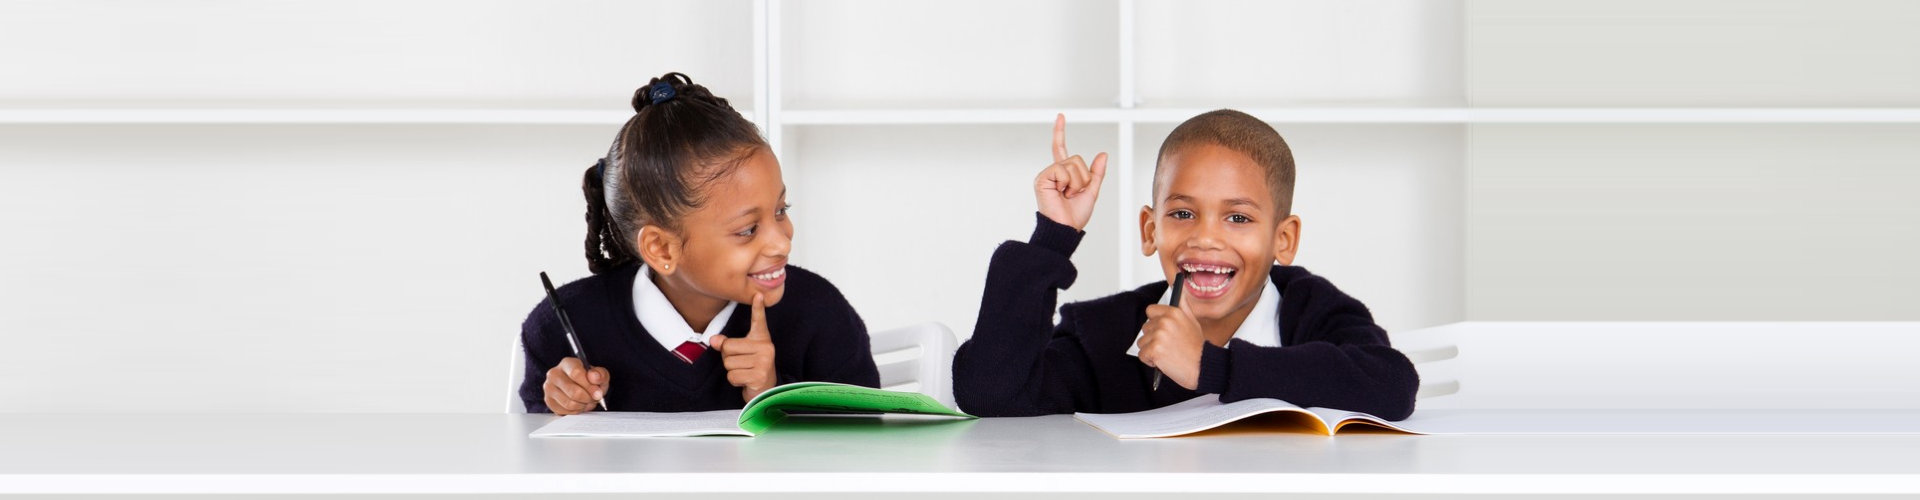 image of two kids studying together